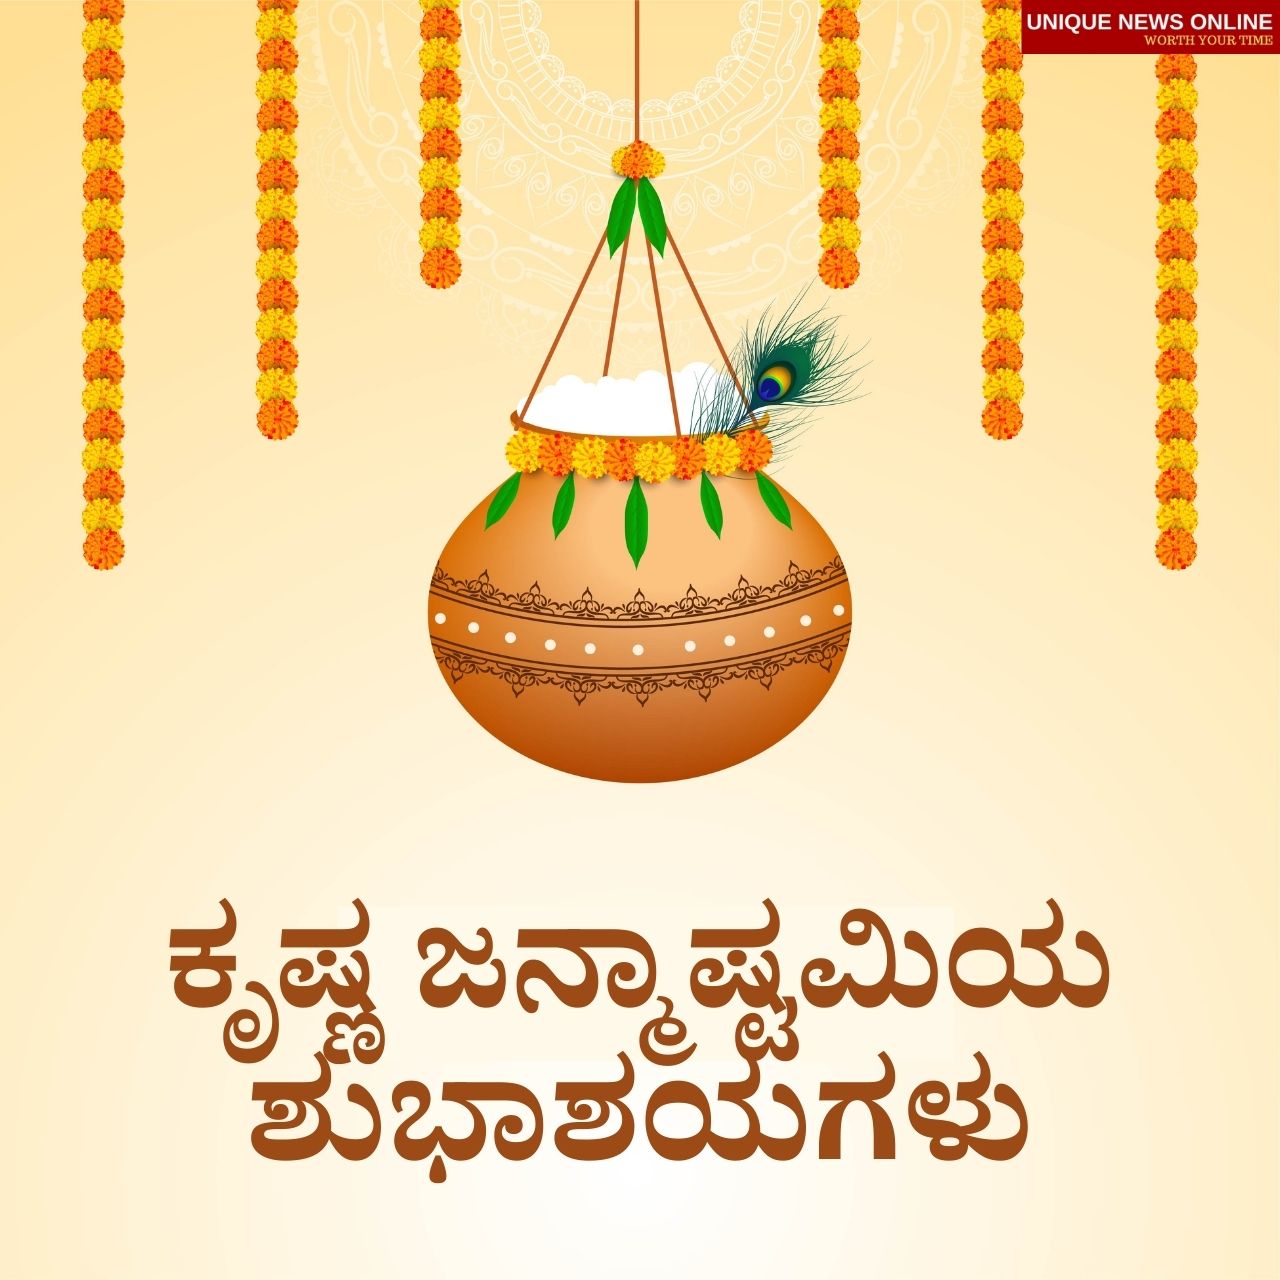 Happy Krishna Janmashtami 2021 Kannada Wishes, Messages, Quotes, HD Images, Messages, Greetings, Facebook, and WhatsApp Status